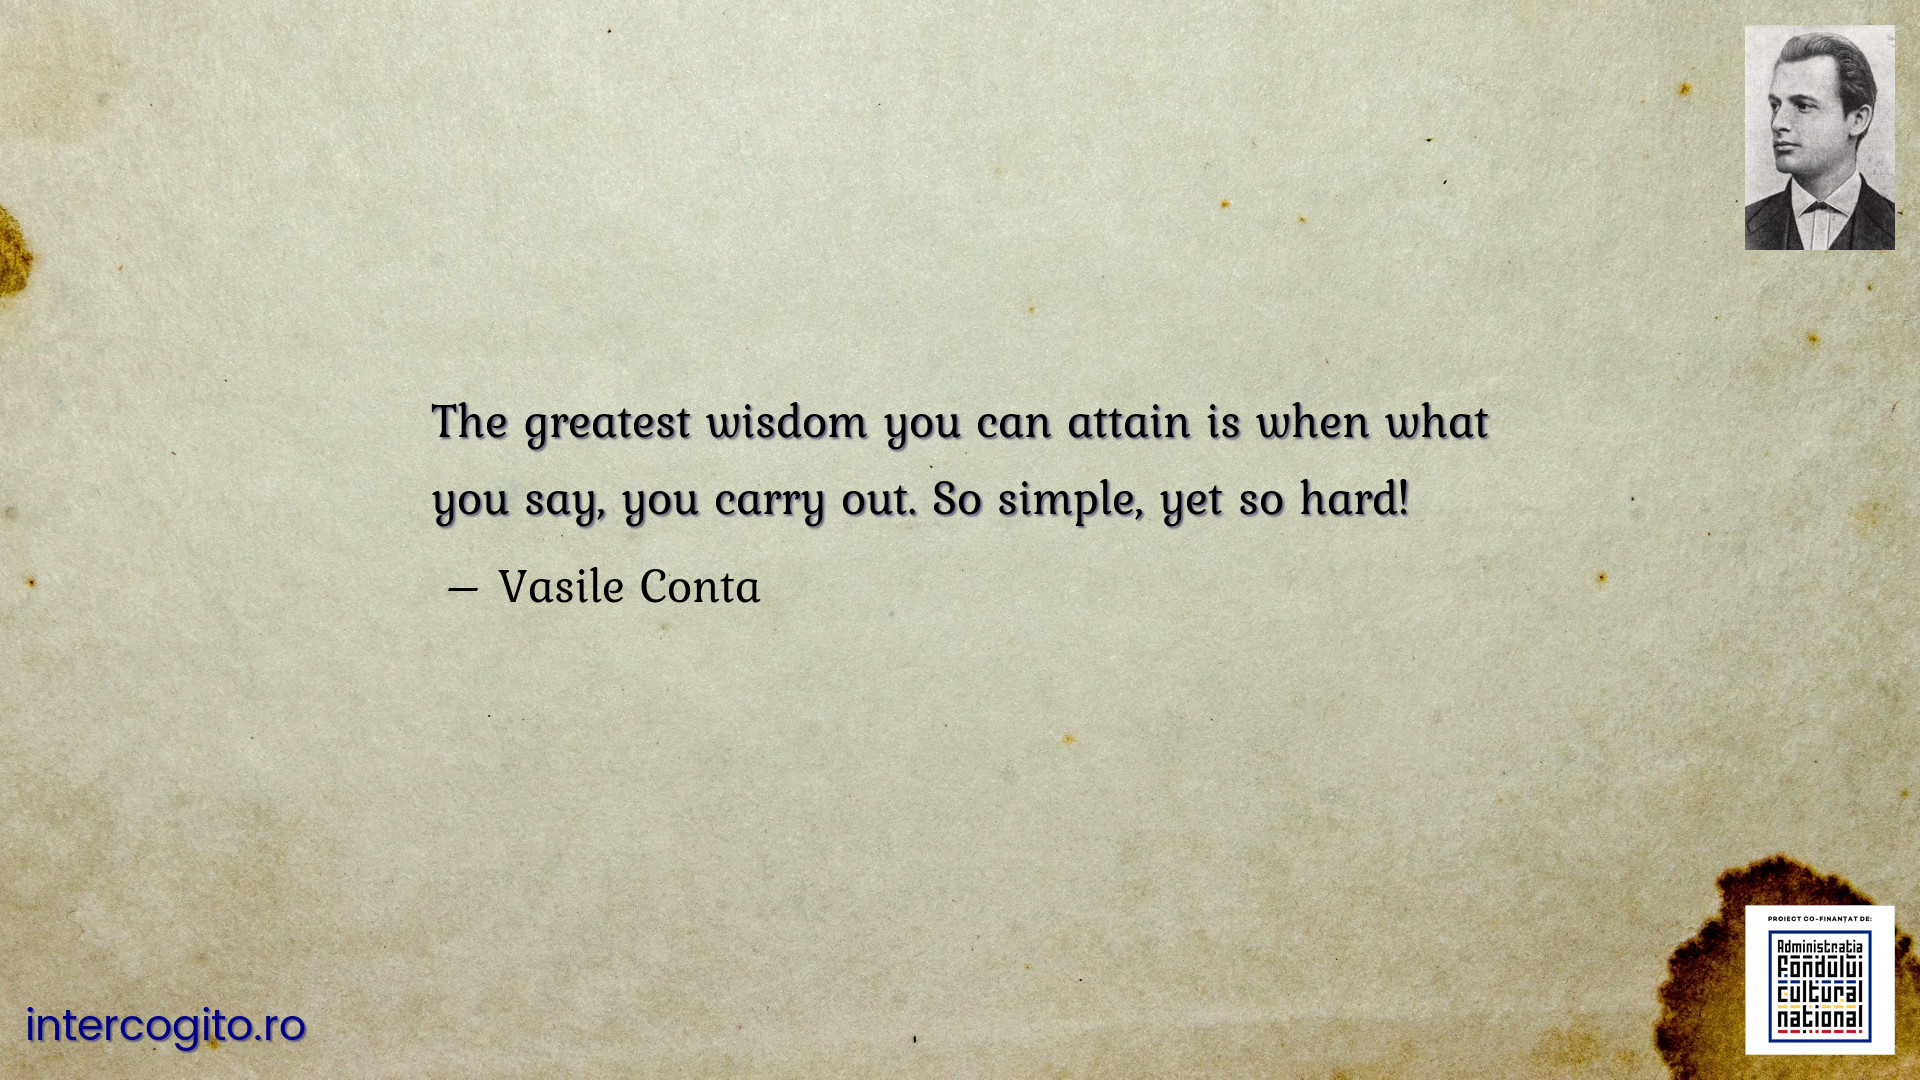 The greatest wisdom you can attain is when what you say, you carry out. So simple, yet so hard!